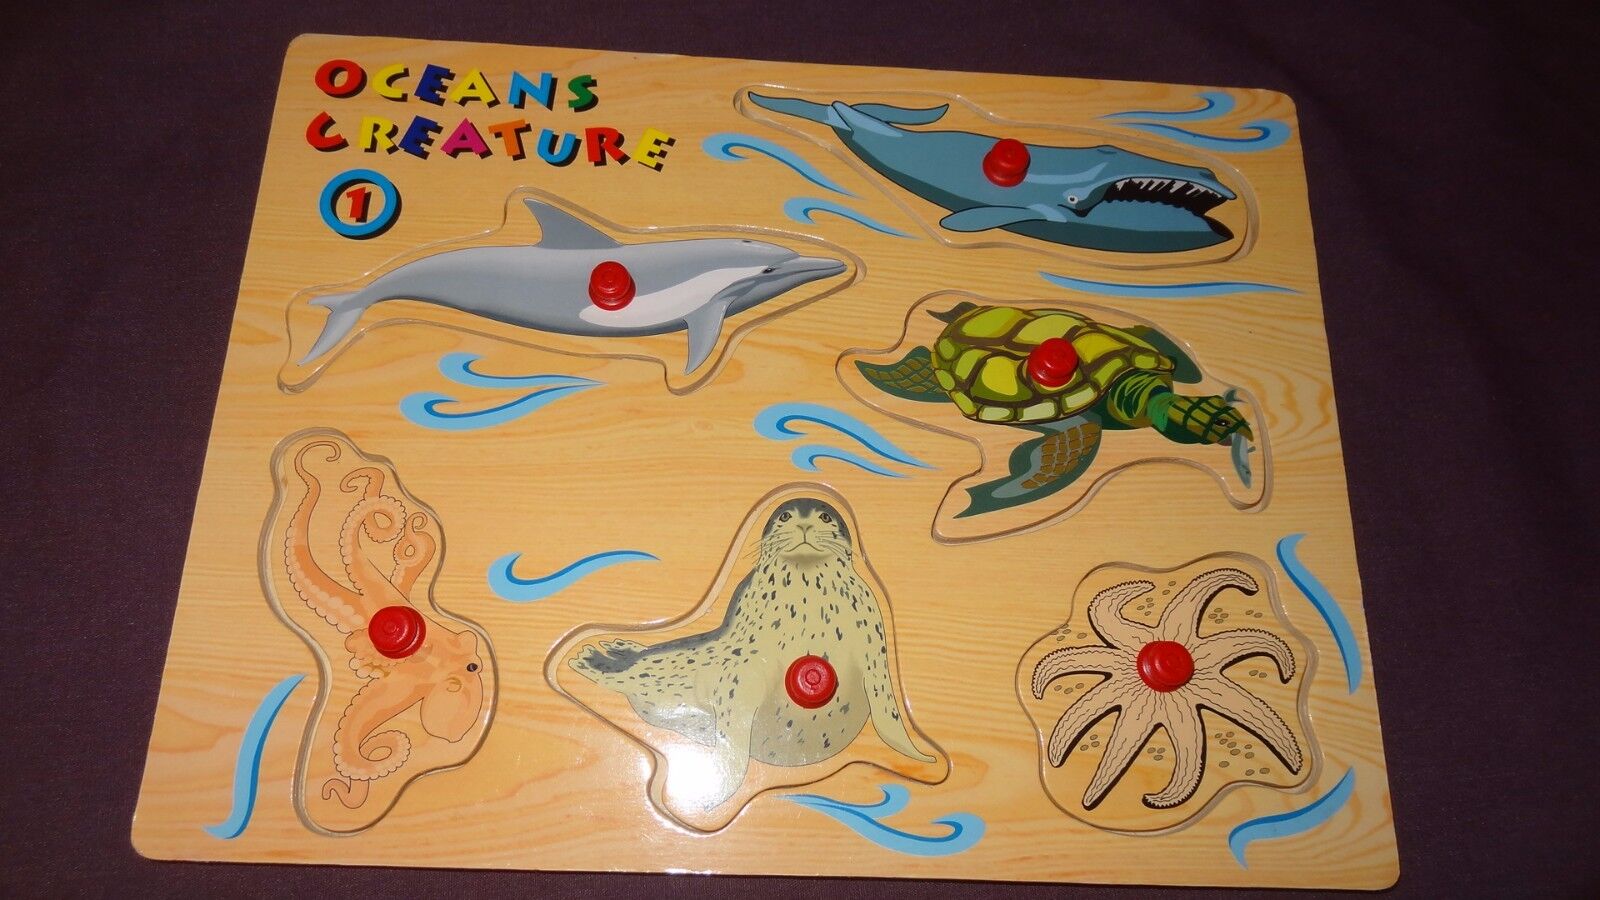 Oceans Puzzle Creature 1 Wooden Peg Tray Toddler Turtle Dolphi...